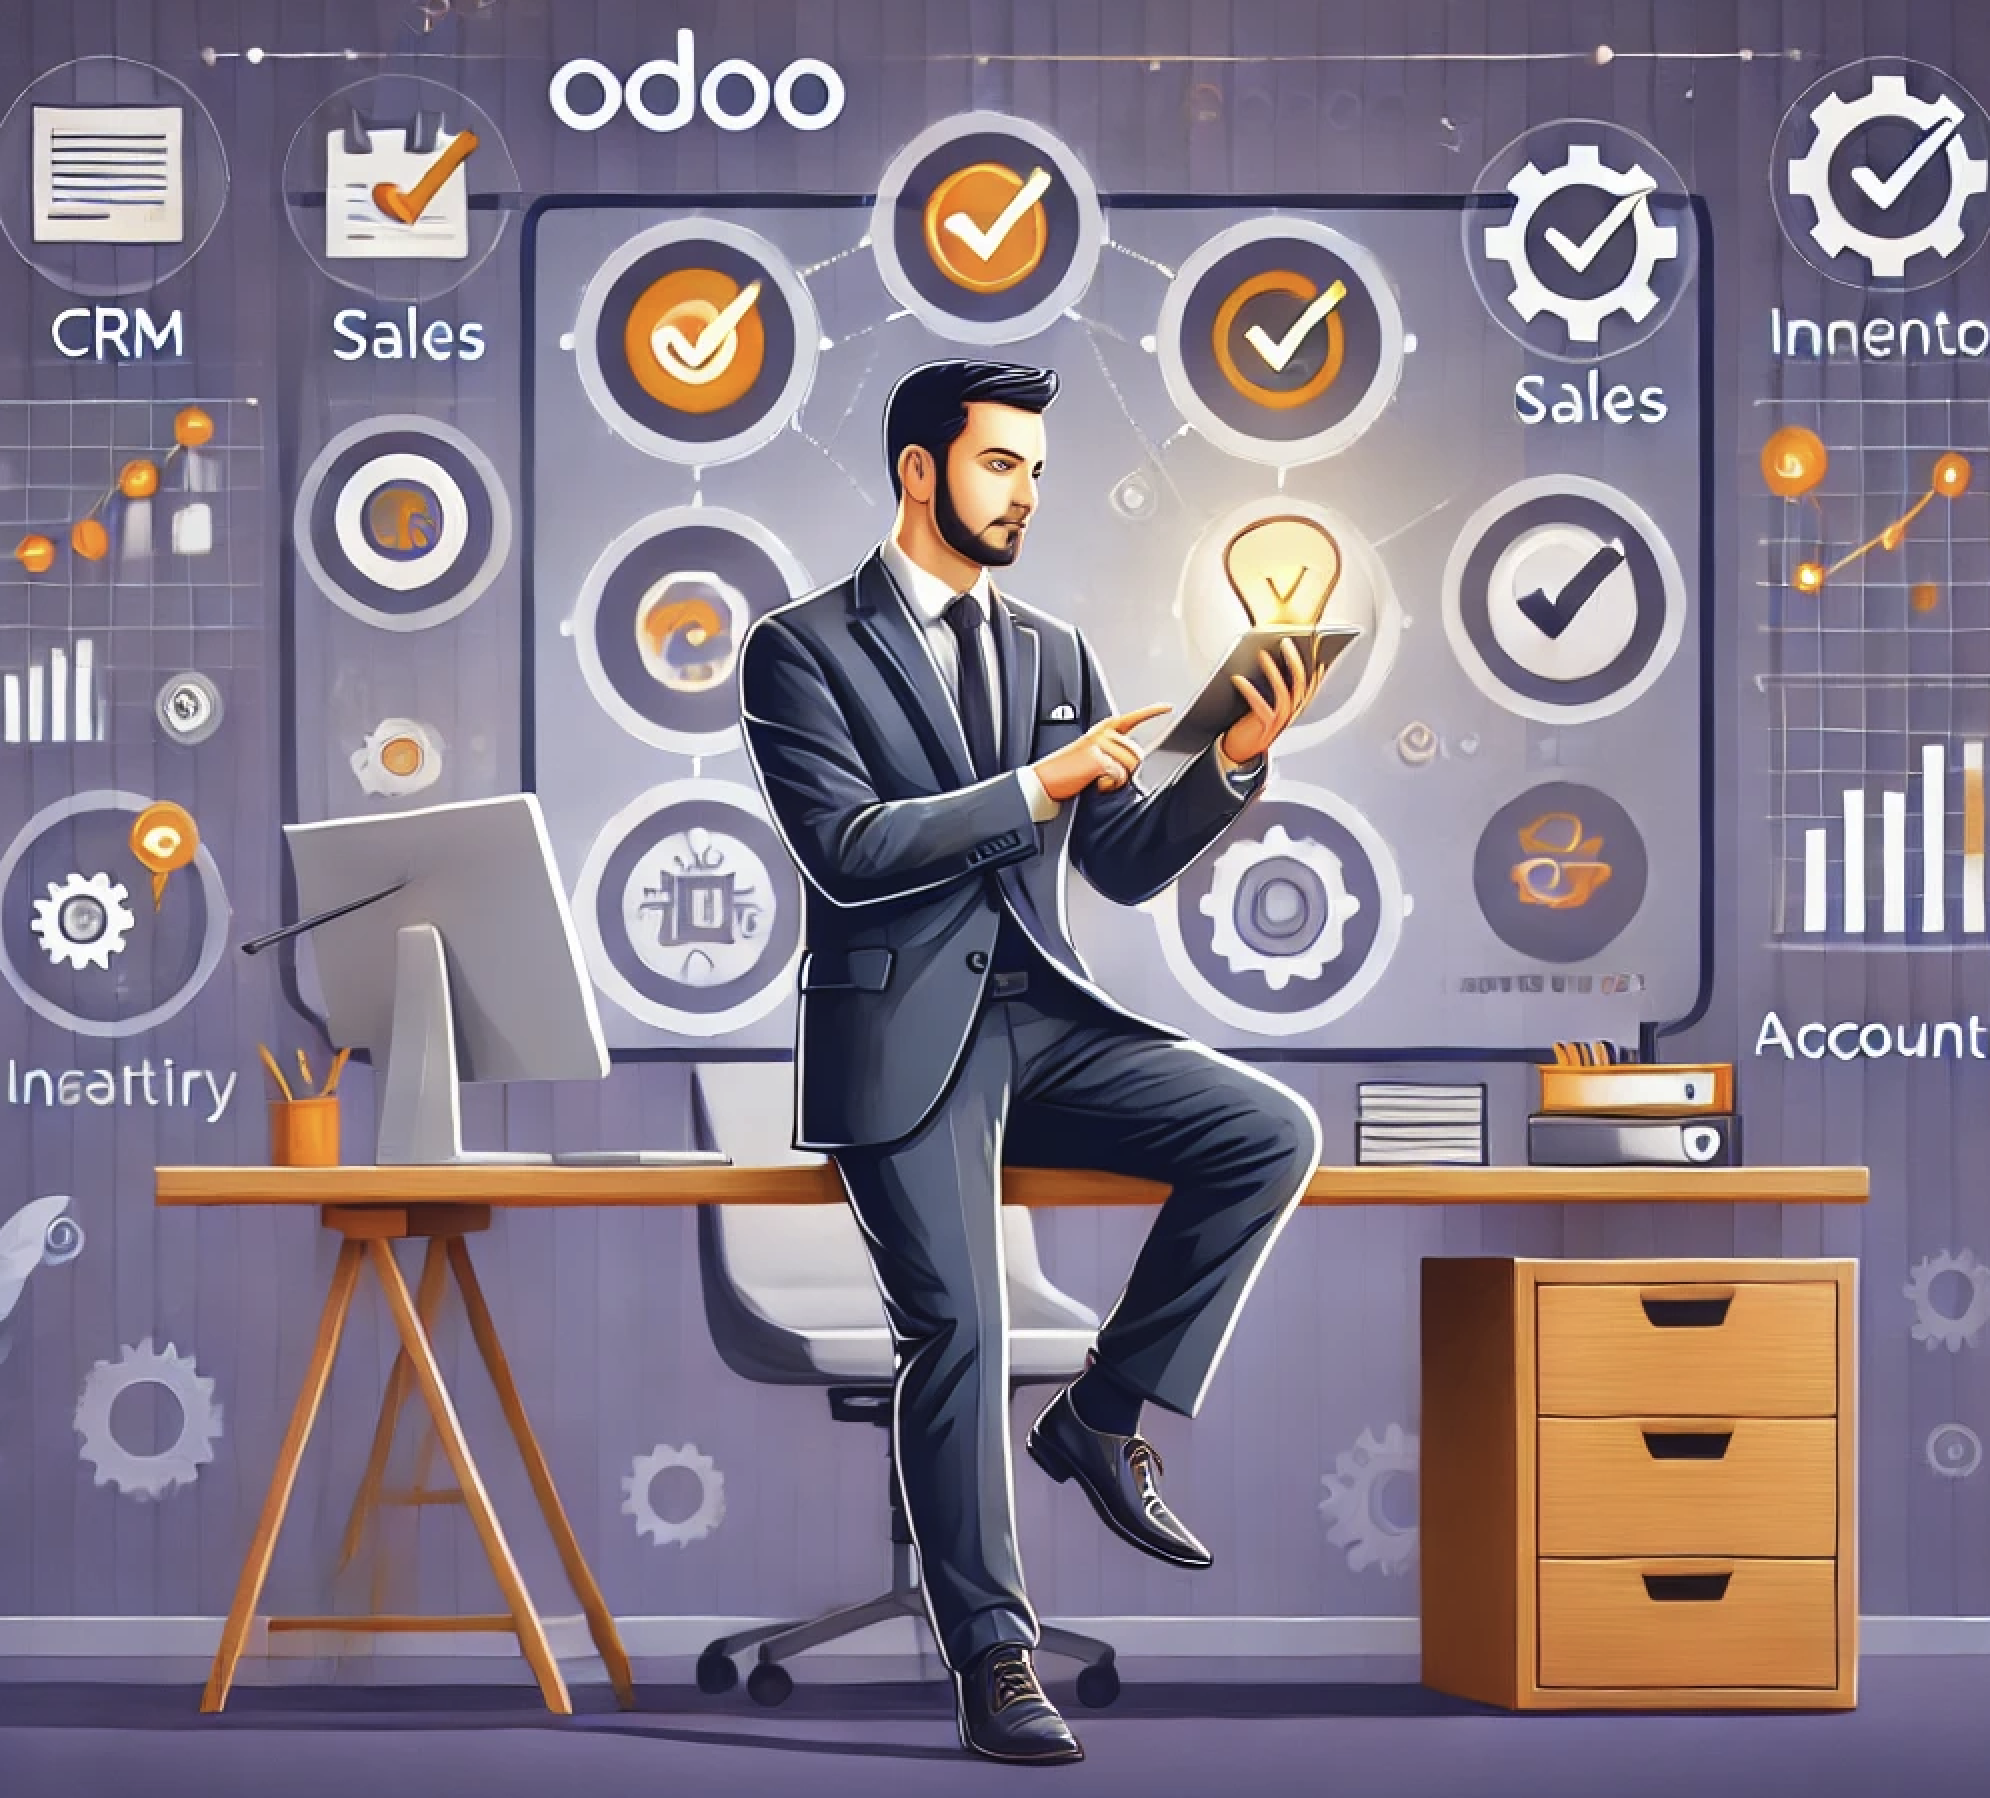 15 signs that your Odoo consultant is premiere level